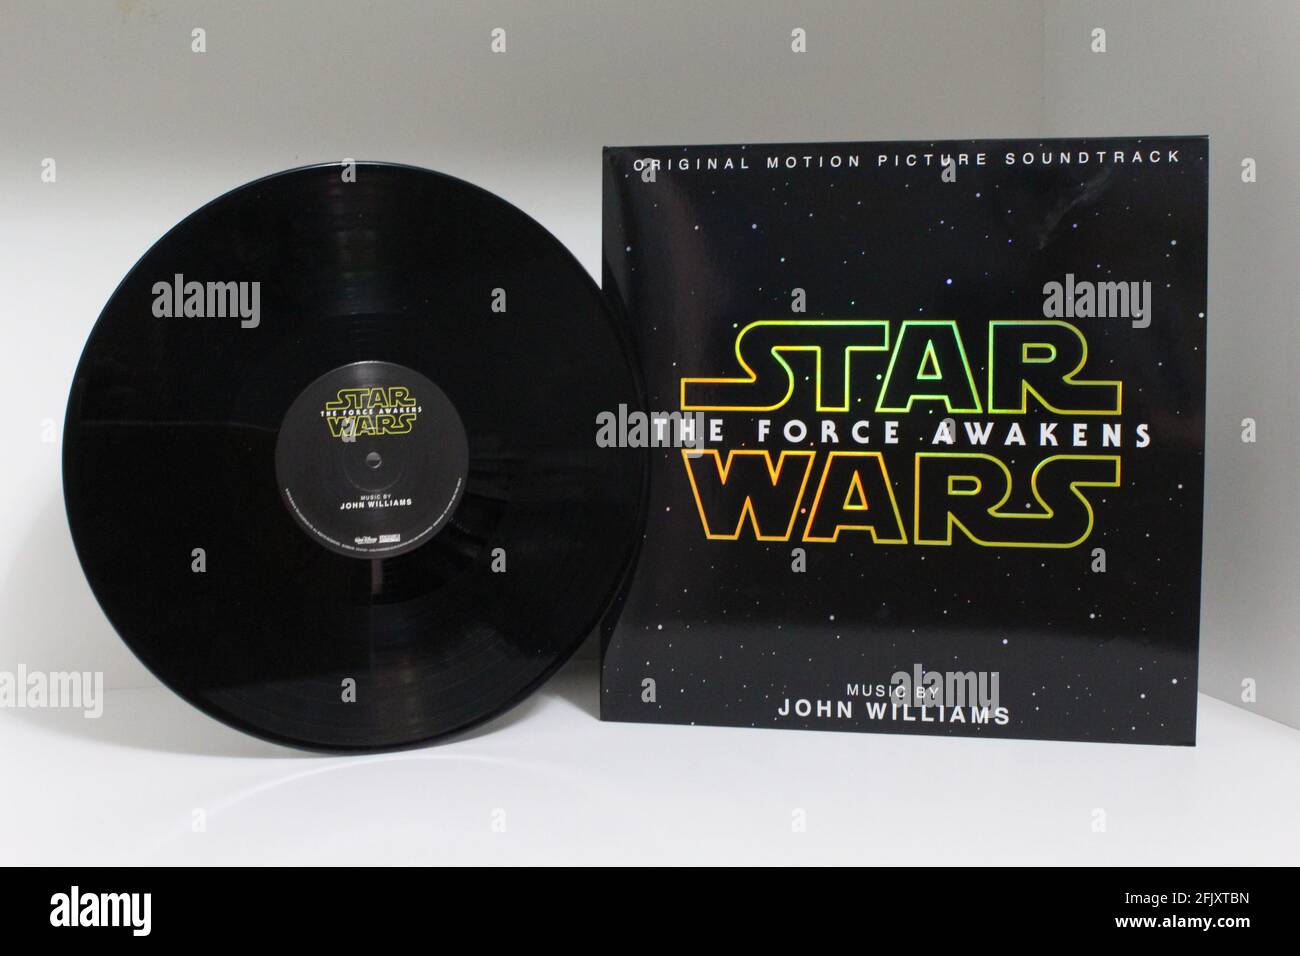 Star Wars The Force Awakens soundtrack on vinyl record LP disc from the motion picture movie soundtrack. Music by John Williams. Stock Photo